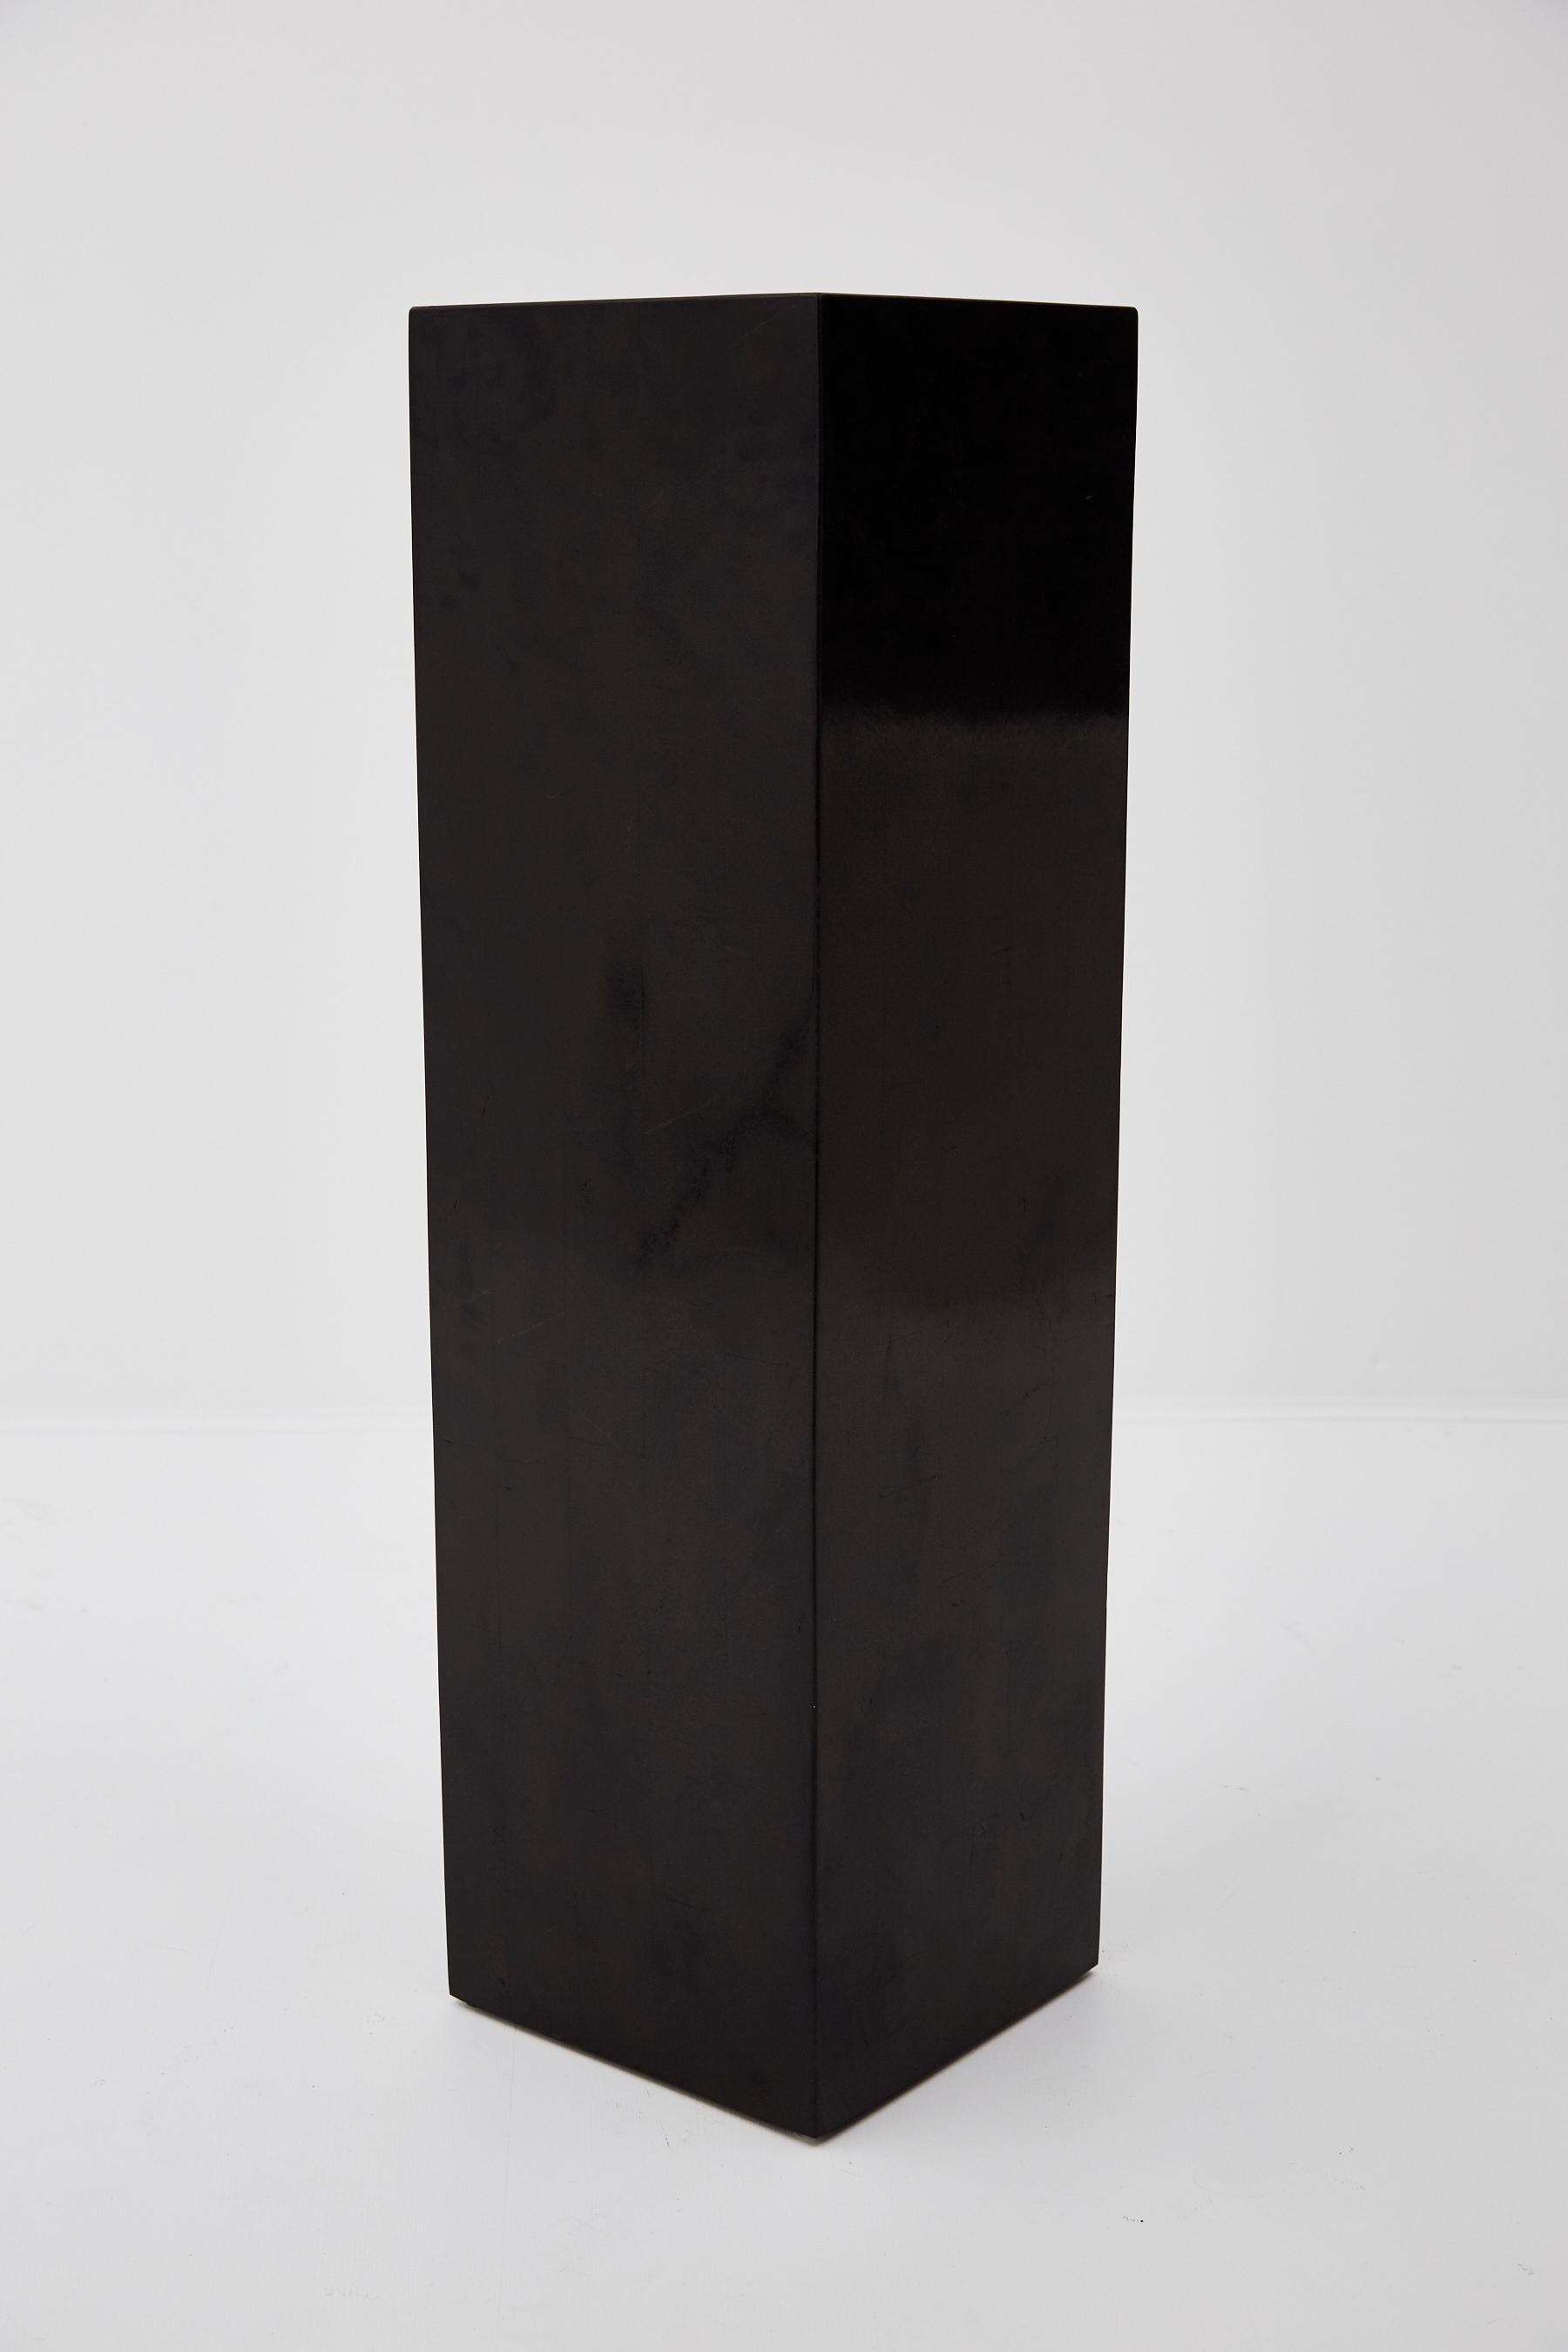 Black tessellated stone square pedestal. Measures: Tall 42 inches.